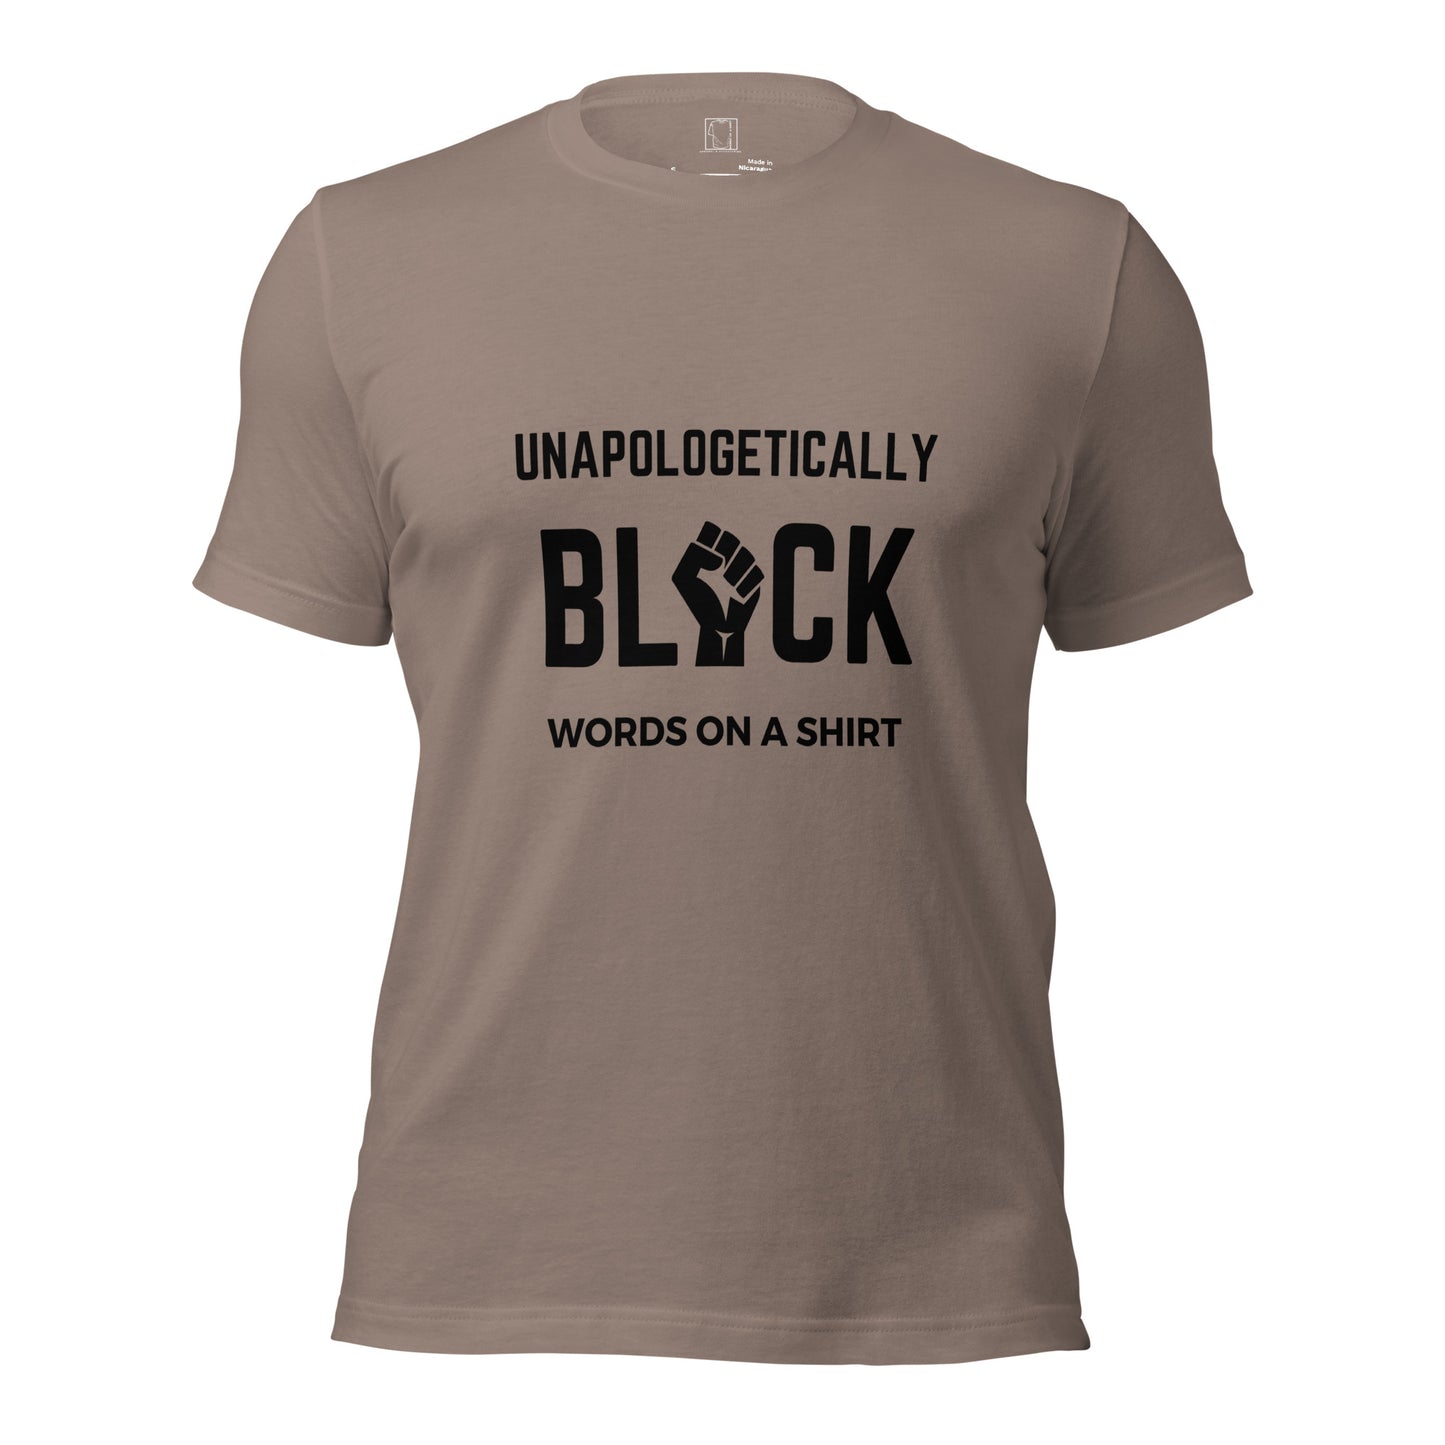 Prepare to be blown away by our unbeatable offer: a 100% cotton tee that will exceed your expectations. Say goodbye to shrinking and hello to impeccable side-seamed construction, all while rocking the best look ever. Get ready, because we are proud to be Unapologetically Black!